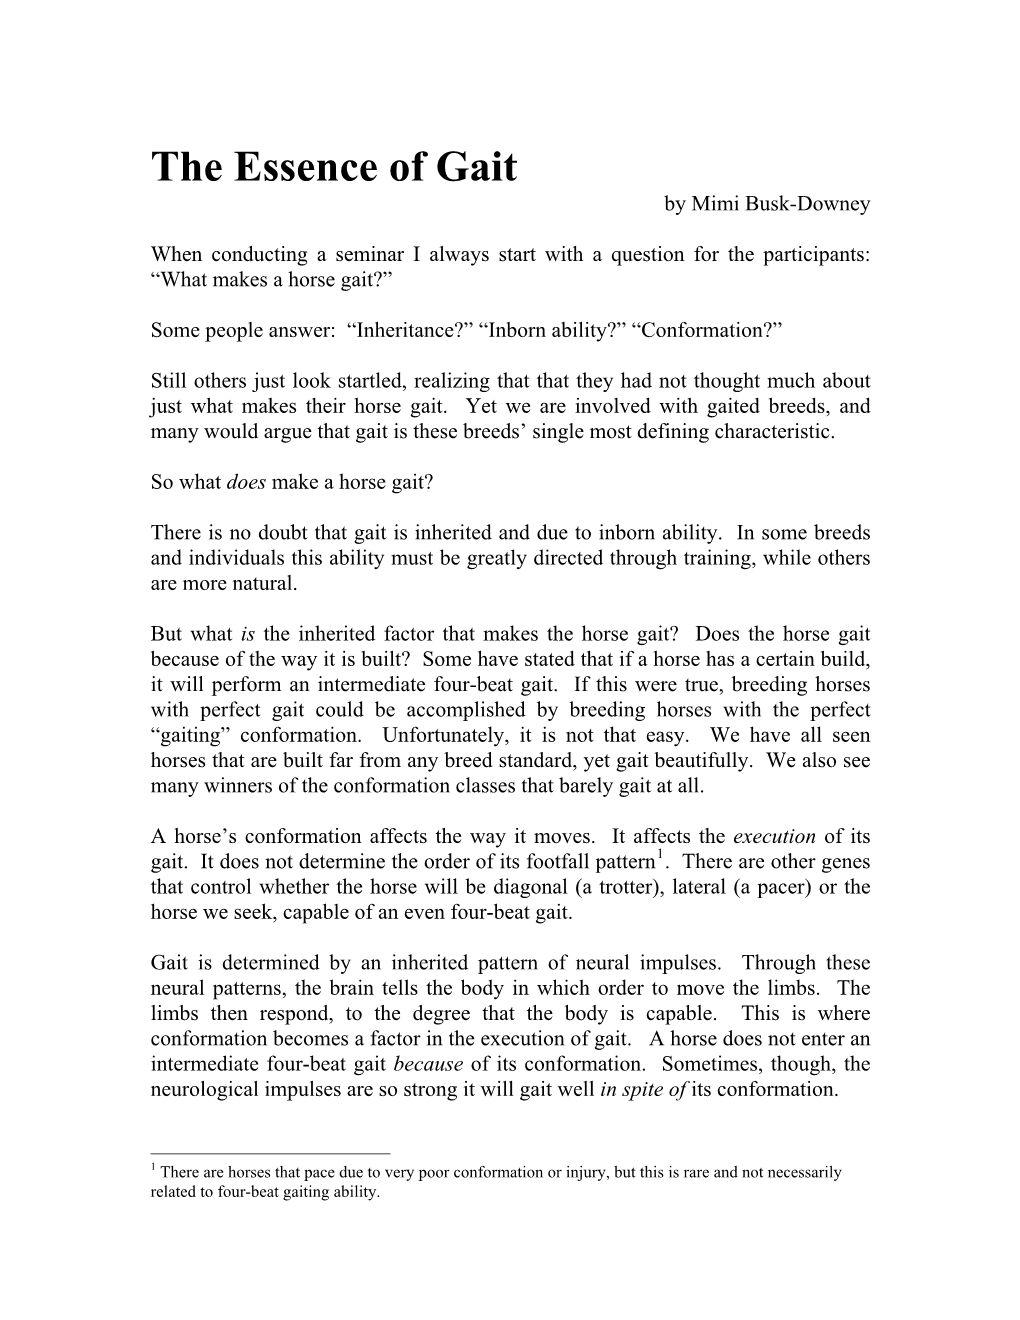 The Essence of Gait by Mimi Busk-Downey